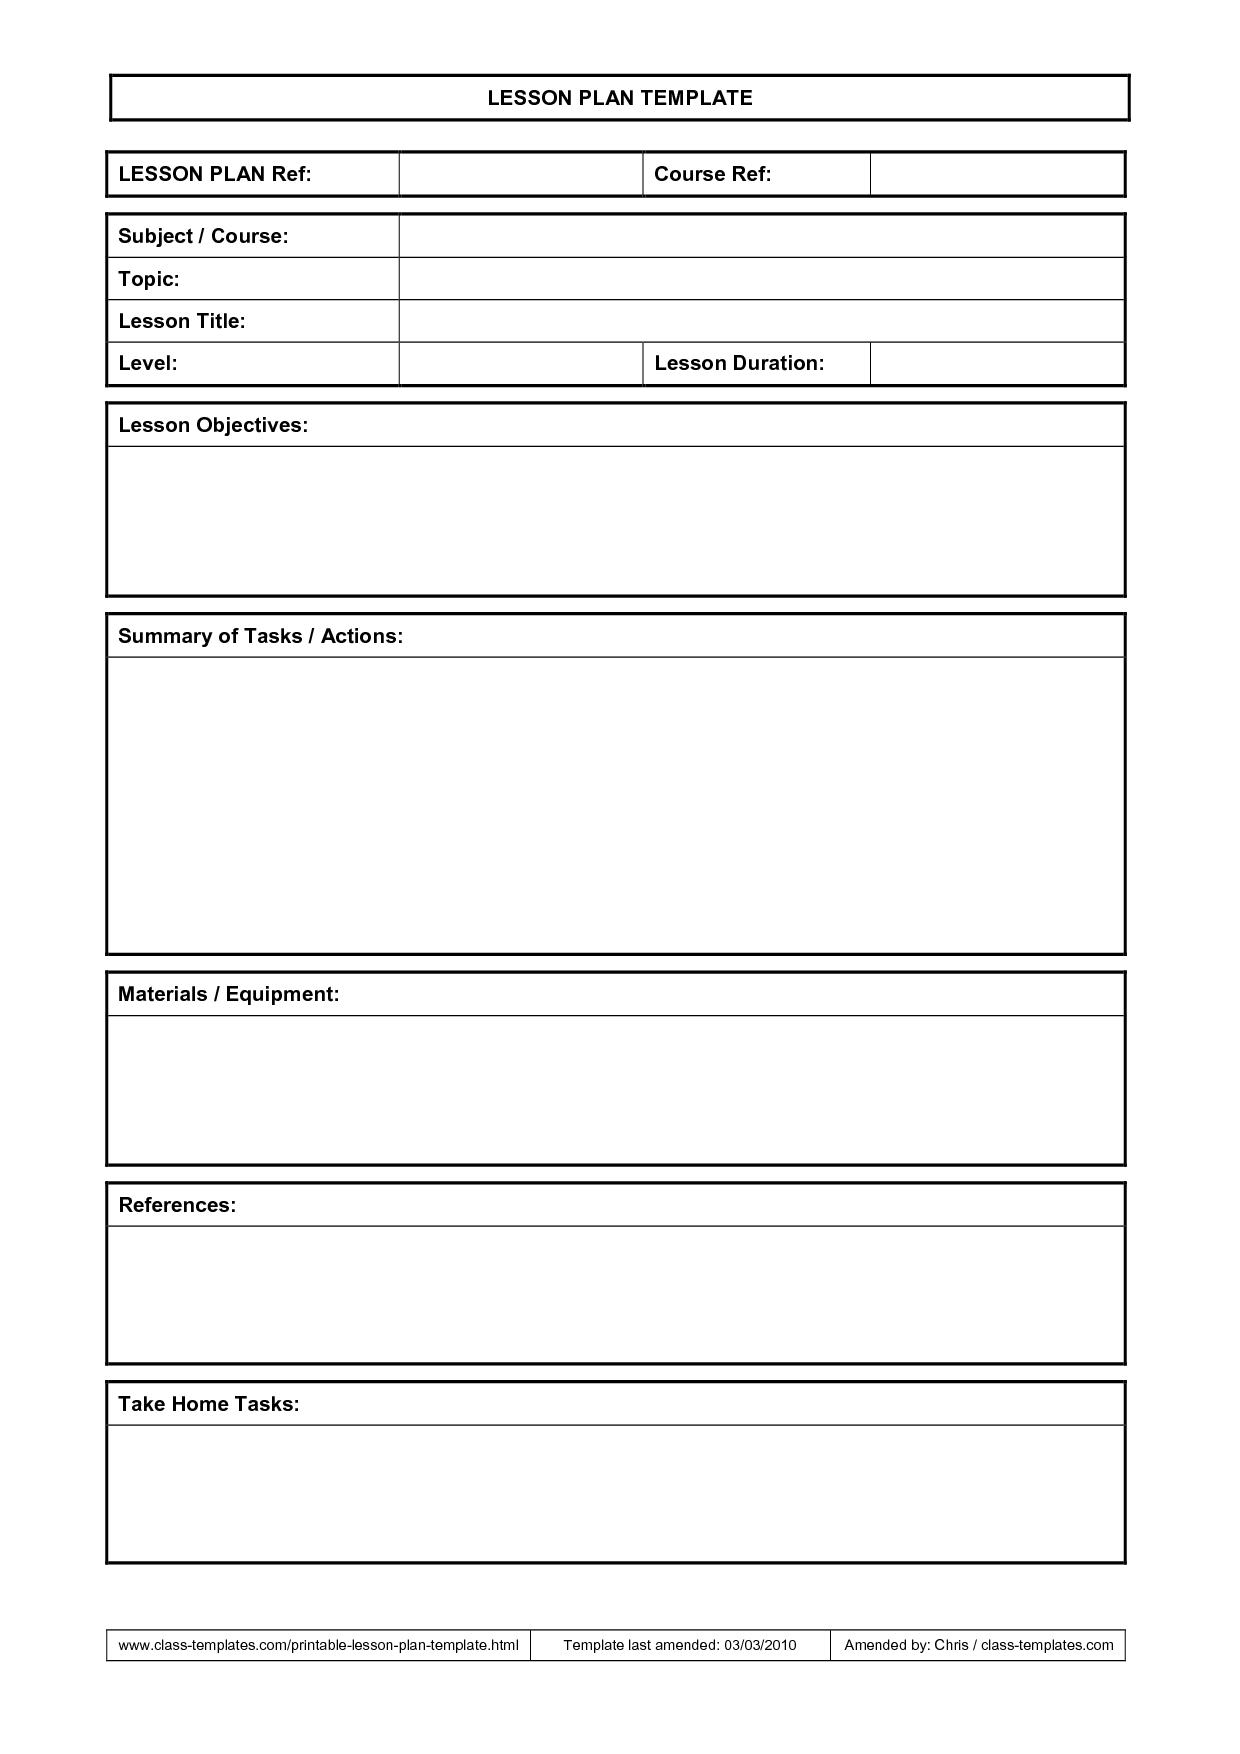 Free Teaching plan templates & formats for students - With Blank Syllabus Template